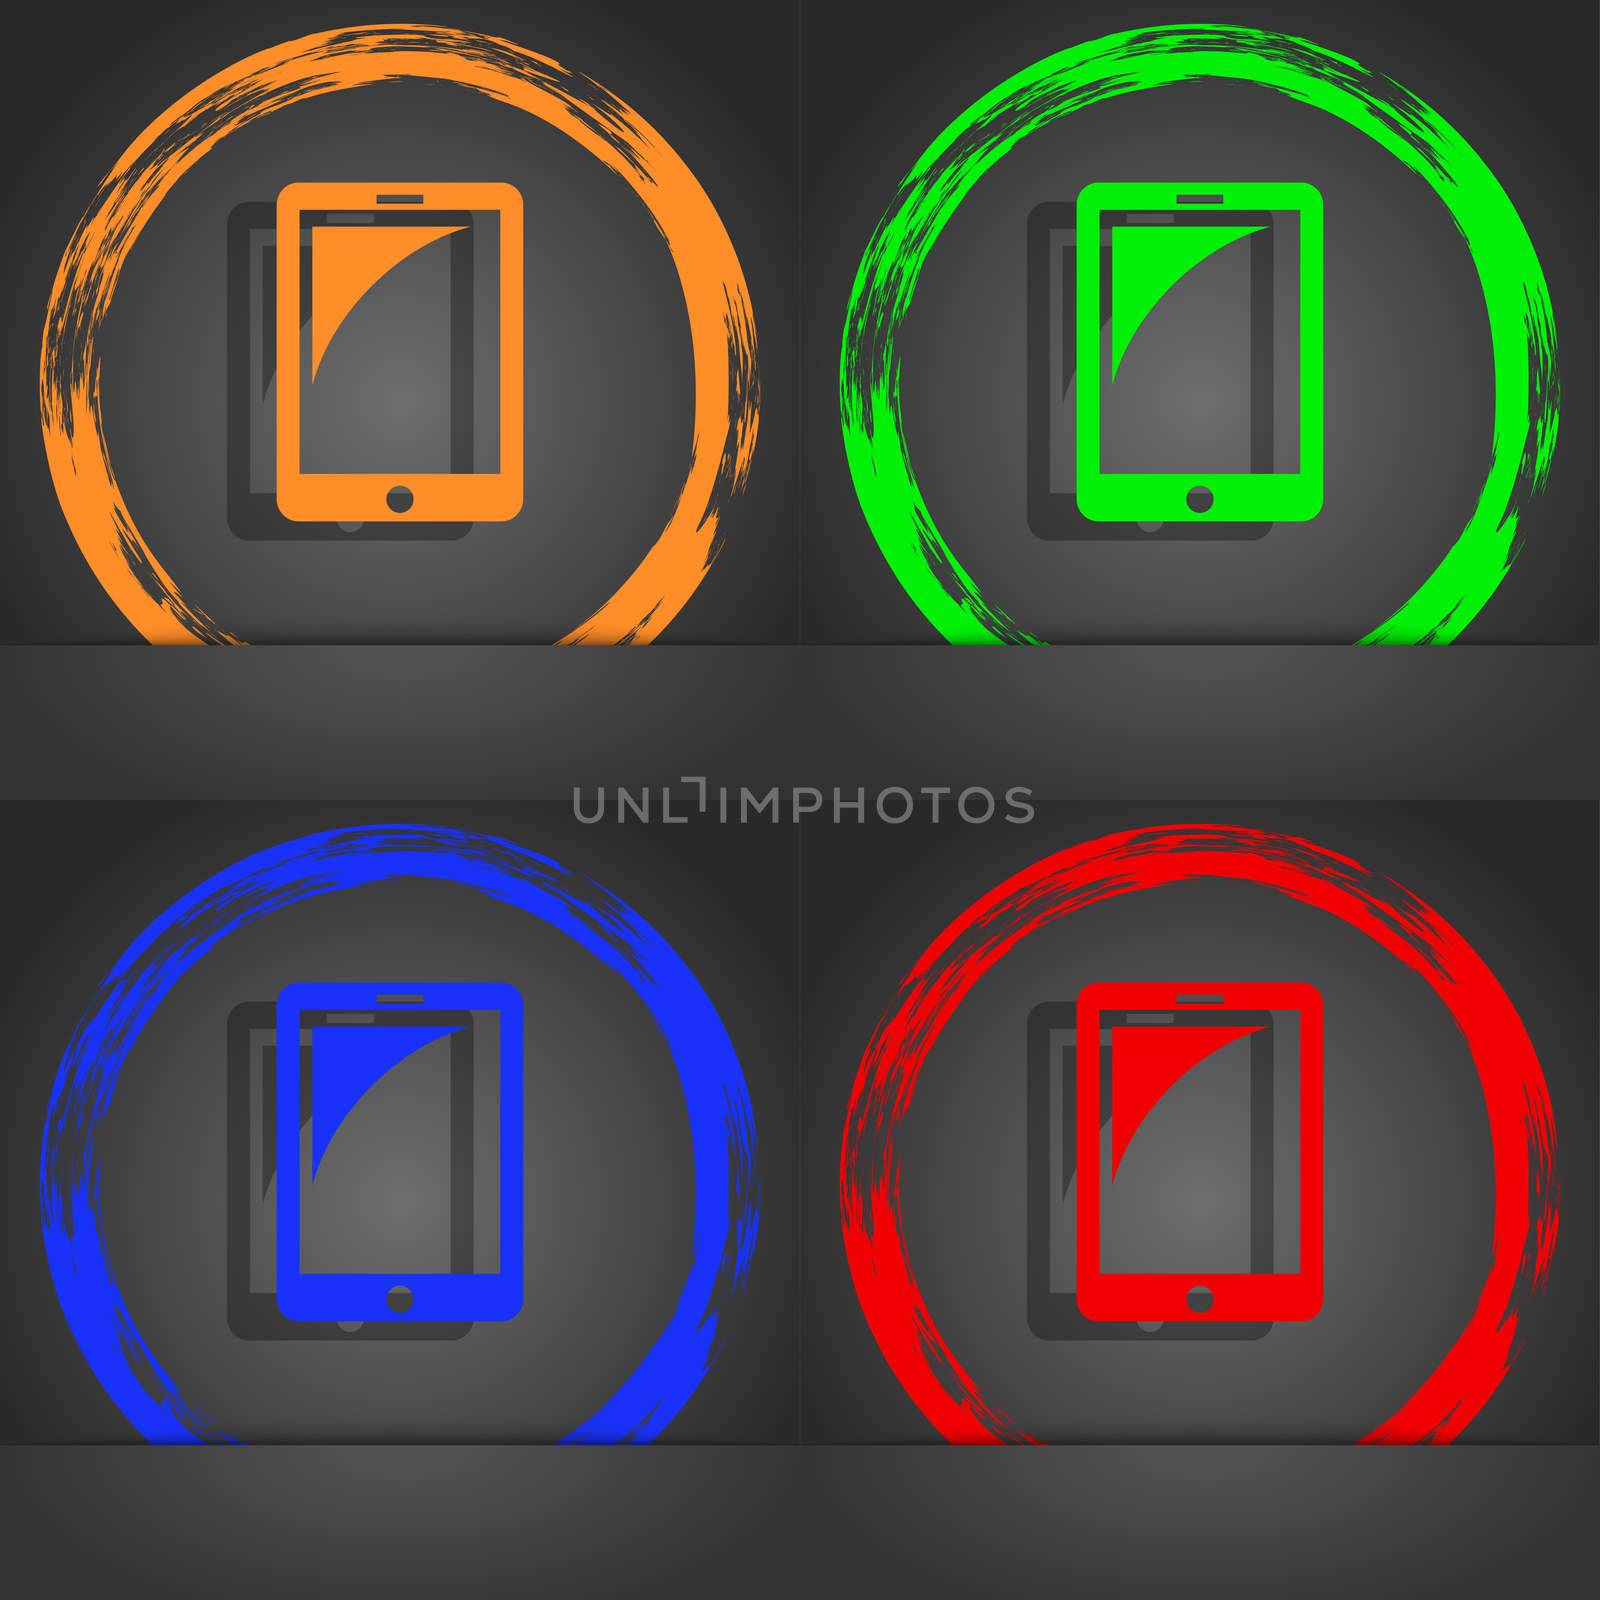 Tablet sign icon. smartphone button. Fashionable modern style. In the orange, green, blue, red design. illustration